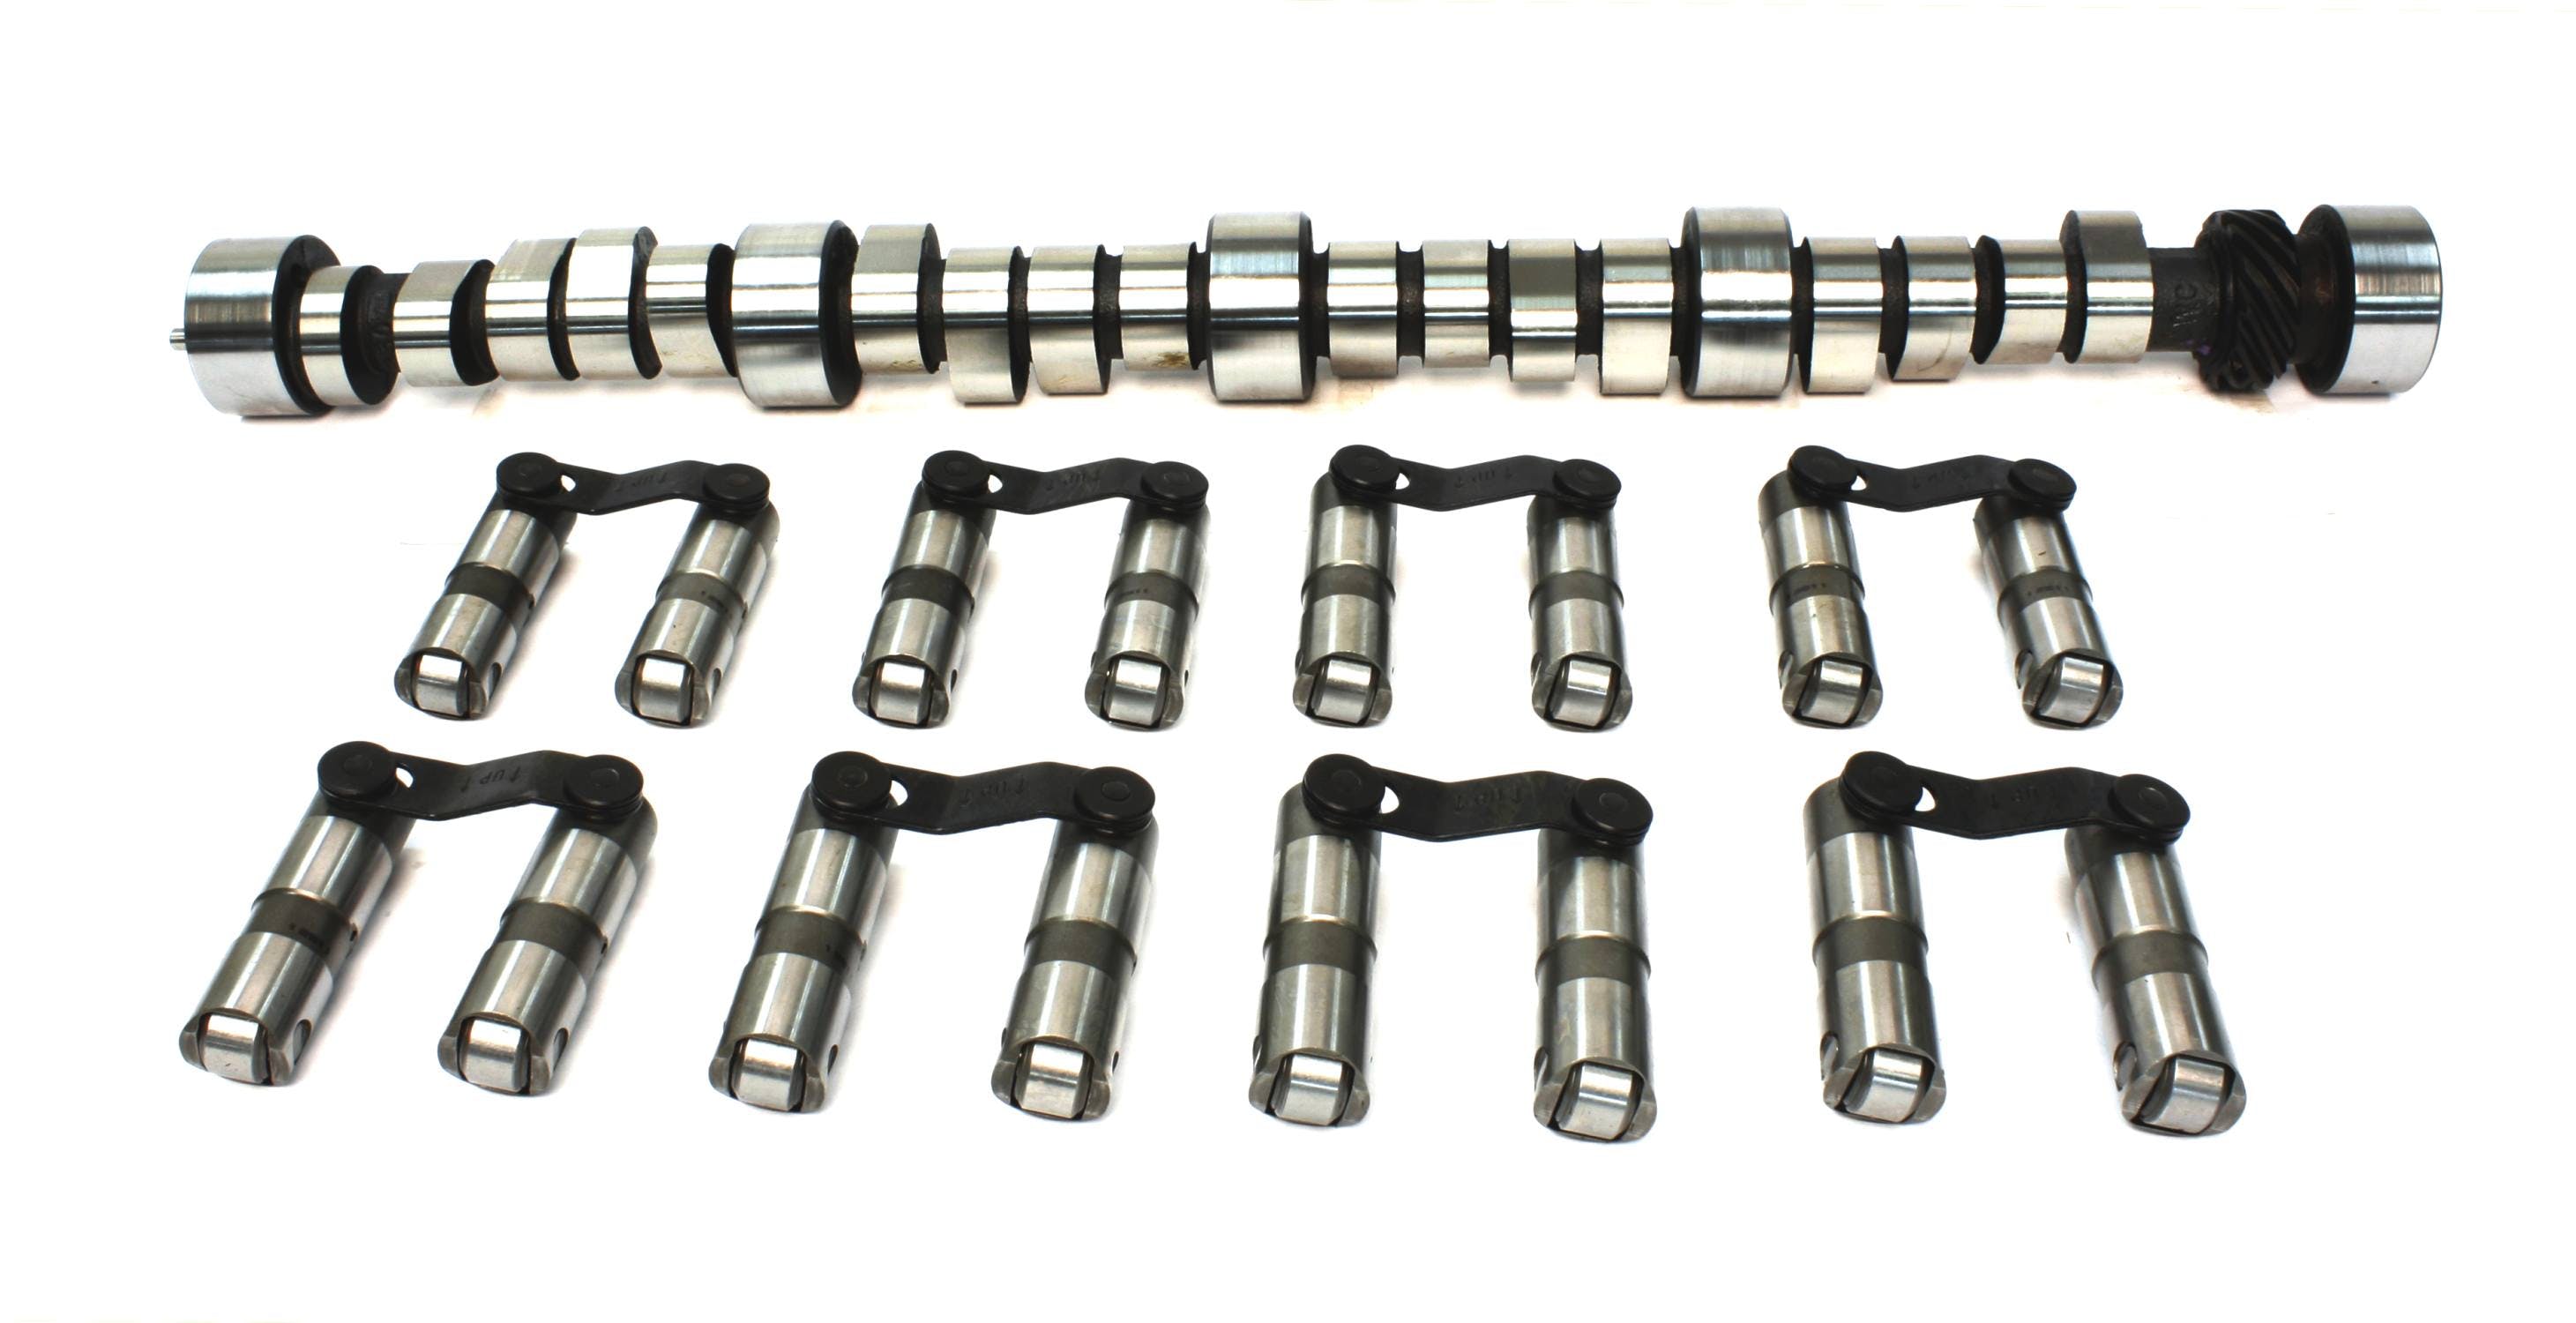 Competition Cams CL11-602-8 BIG MUTHATHUMPR 243/257 HYD ROLLER CAM/LIFTER KIT CHEVY BIG BLOCK 396-454